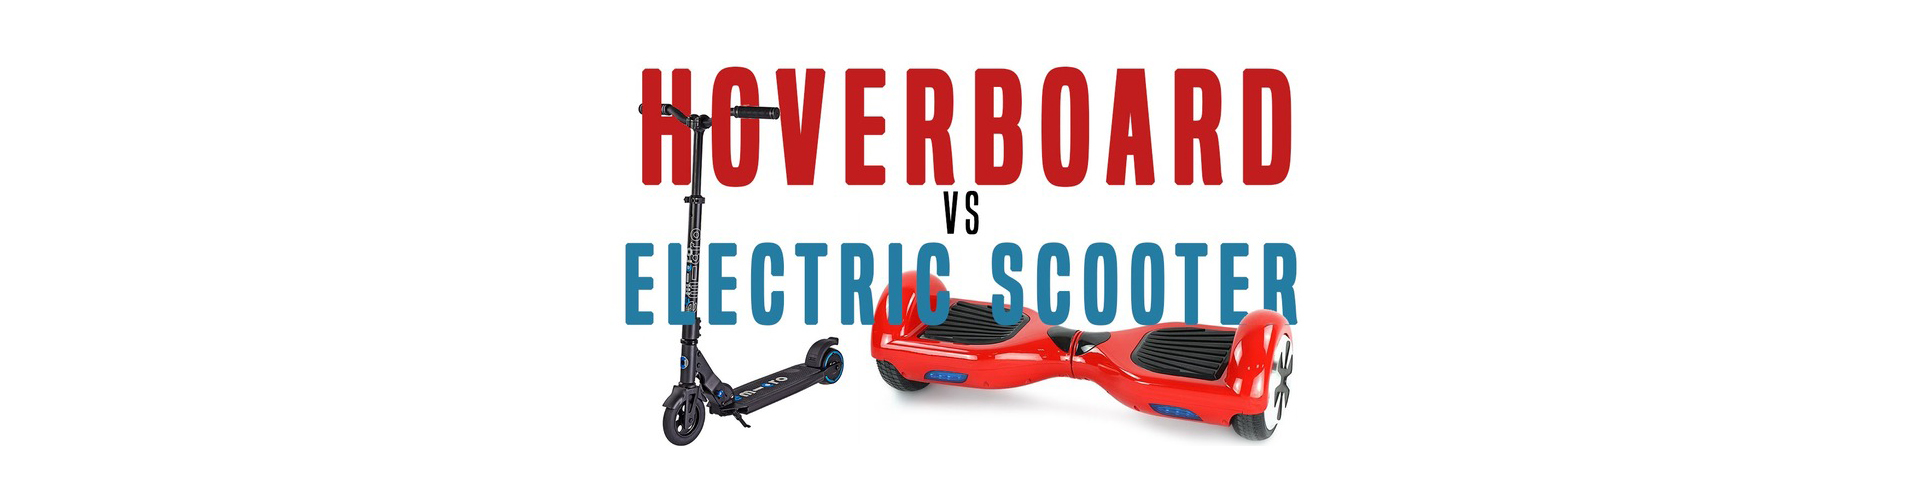 Is an electric scooter better than a hoverboard?